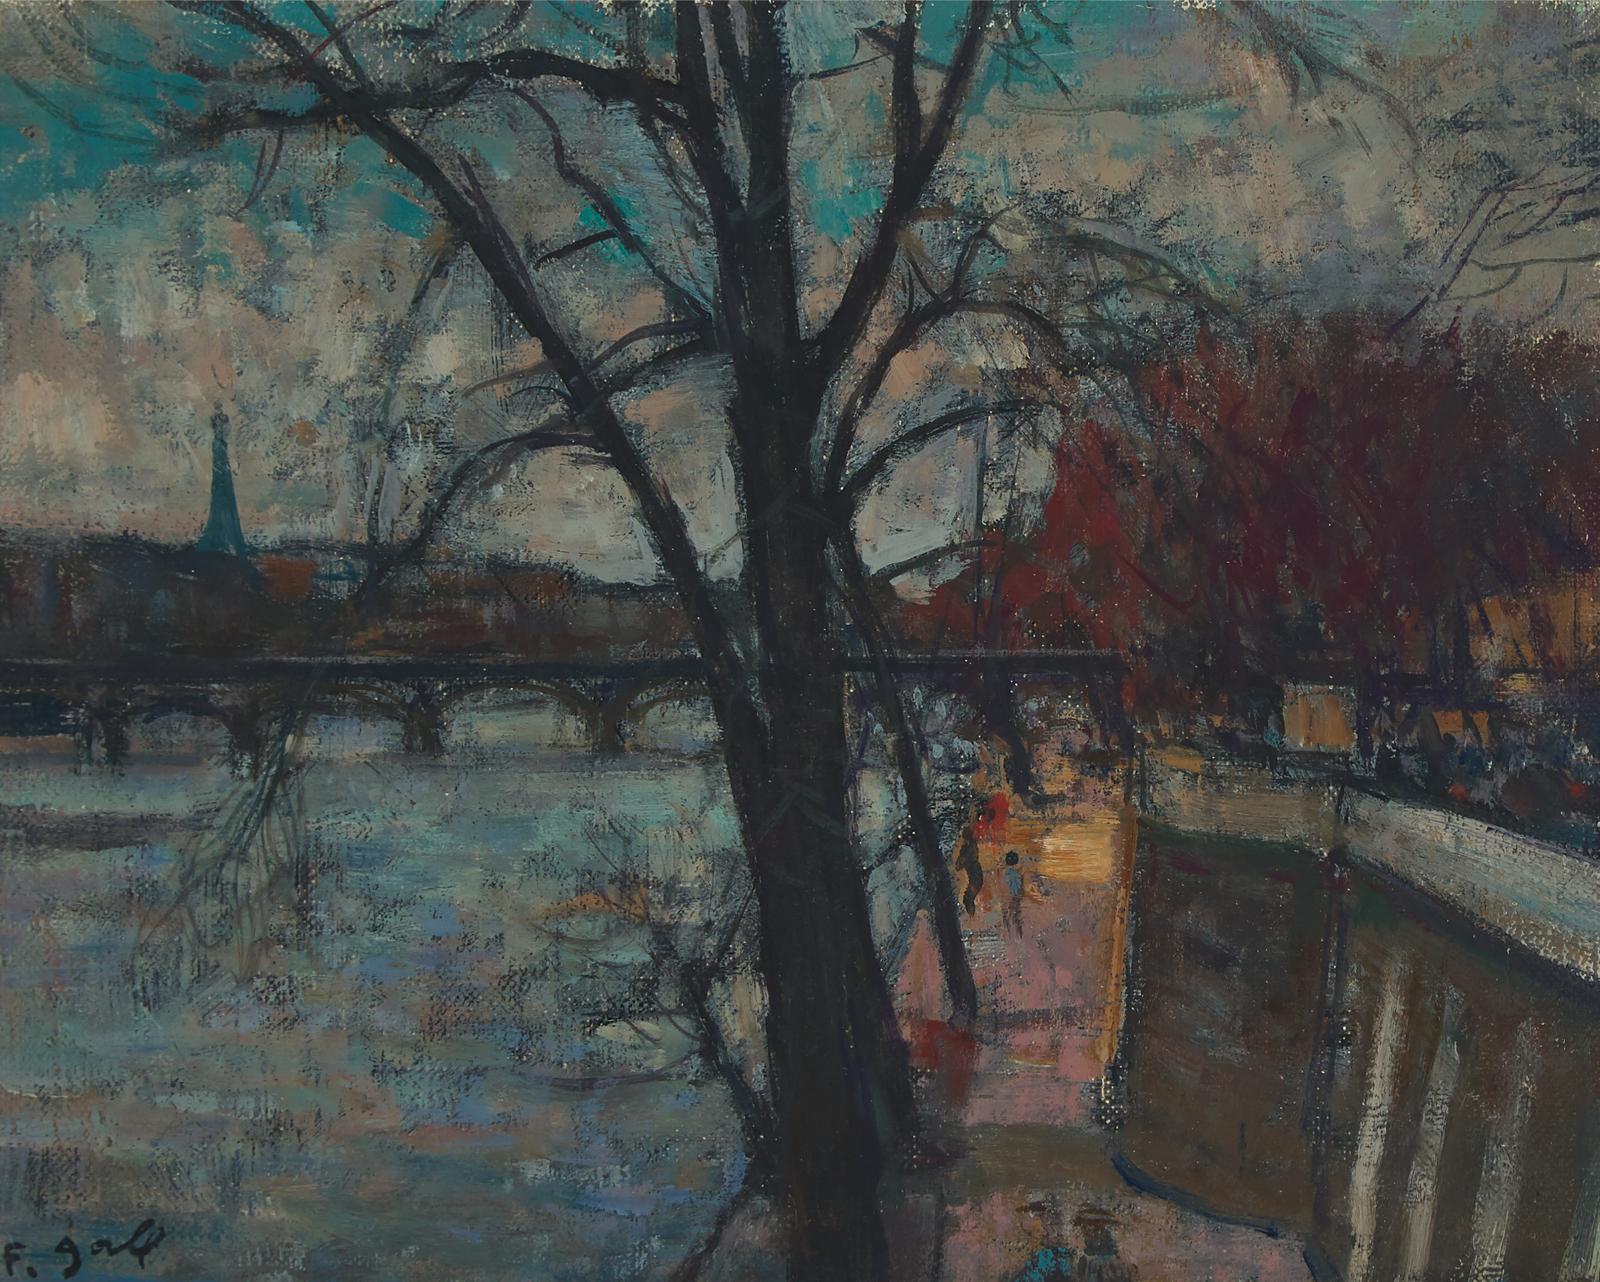 François Gall (1912-1987) - Evening On The Seine (The Eiffel Tower In The Distance)